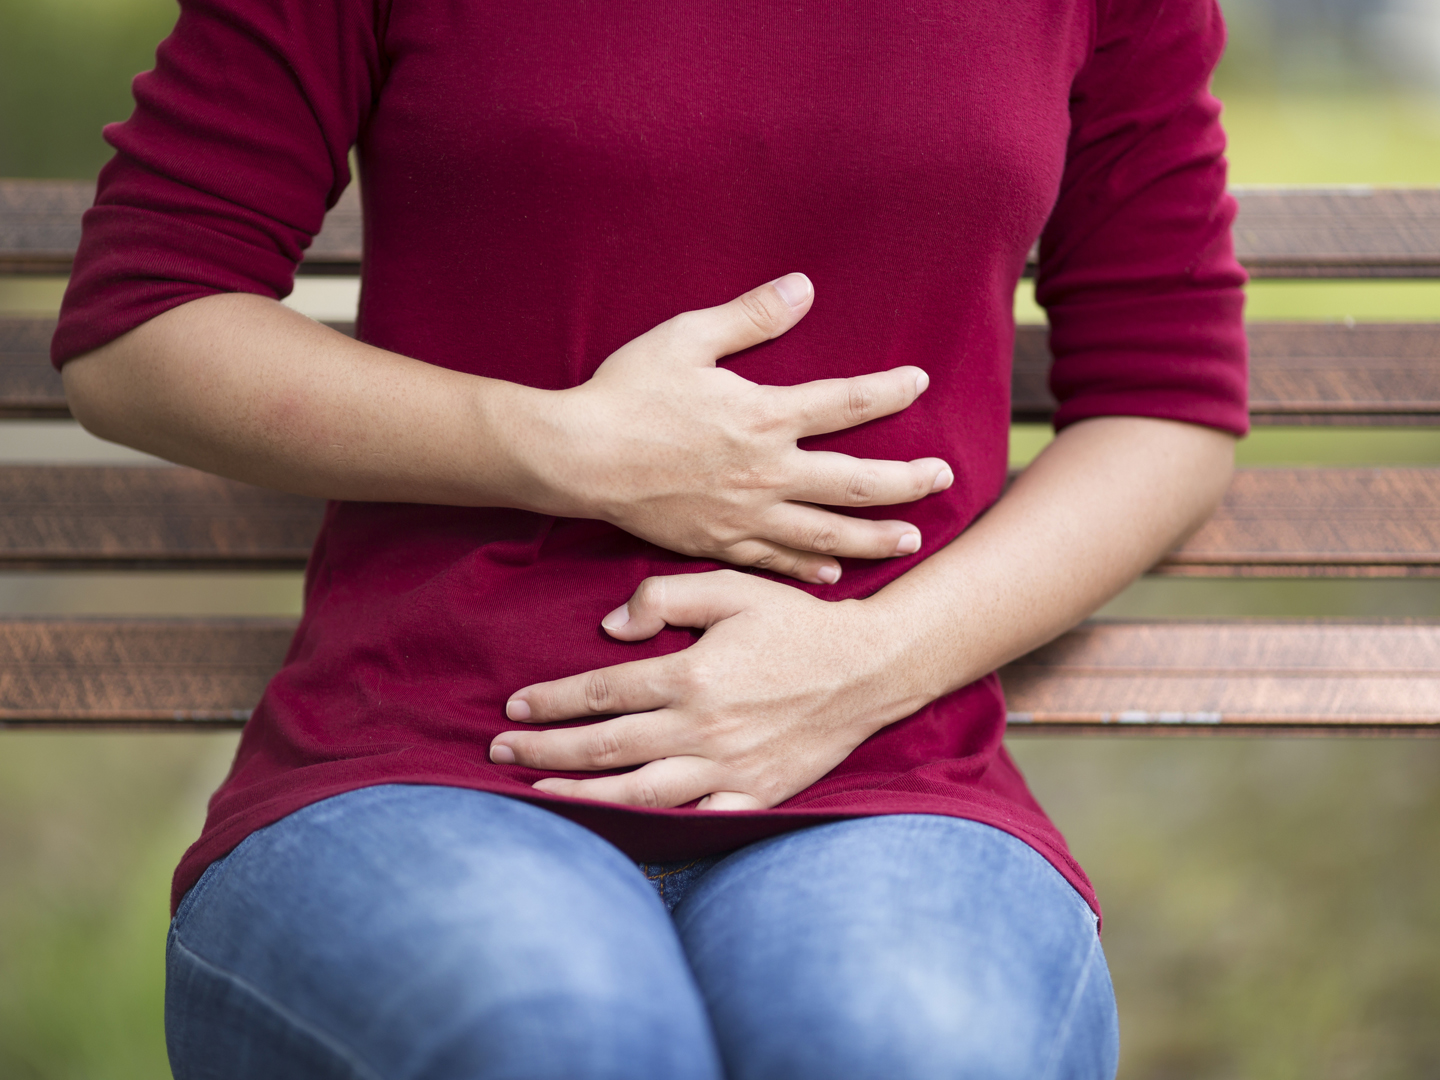 Woman Has Stomach Ache Sitting on Bench at Park